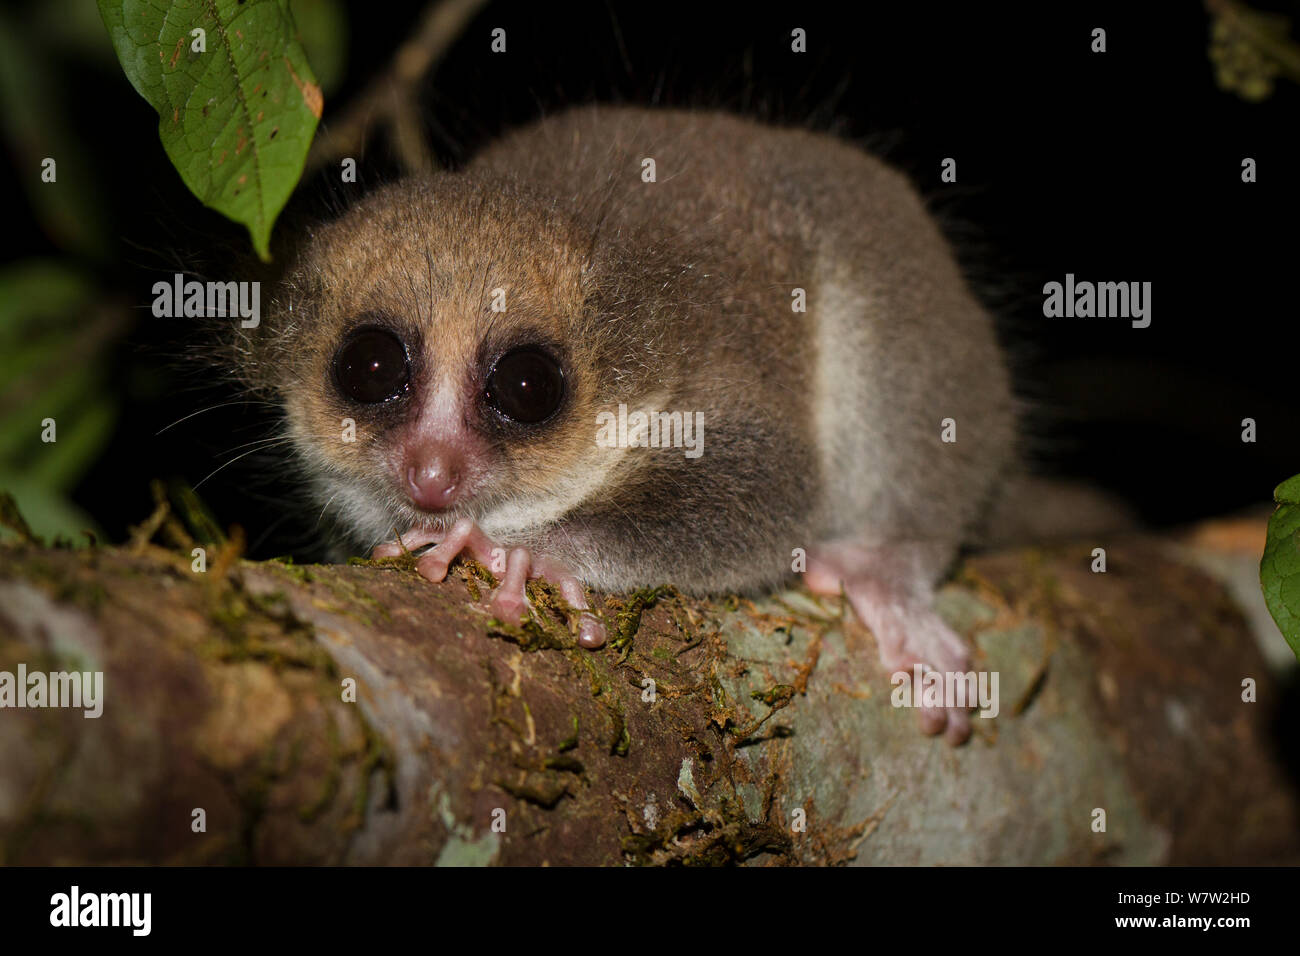 Adult Hairy-eared Dwarf Lemur (Allocebus trichotis) in the forest understorey at night. Mitsinjo Forest, Andasibe-Mantadia National Park, eastern Madagascar. Endangered species. Stock Photo